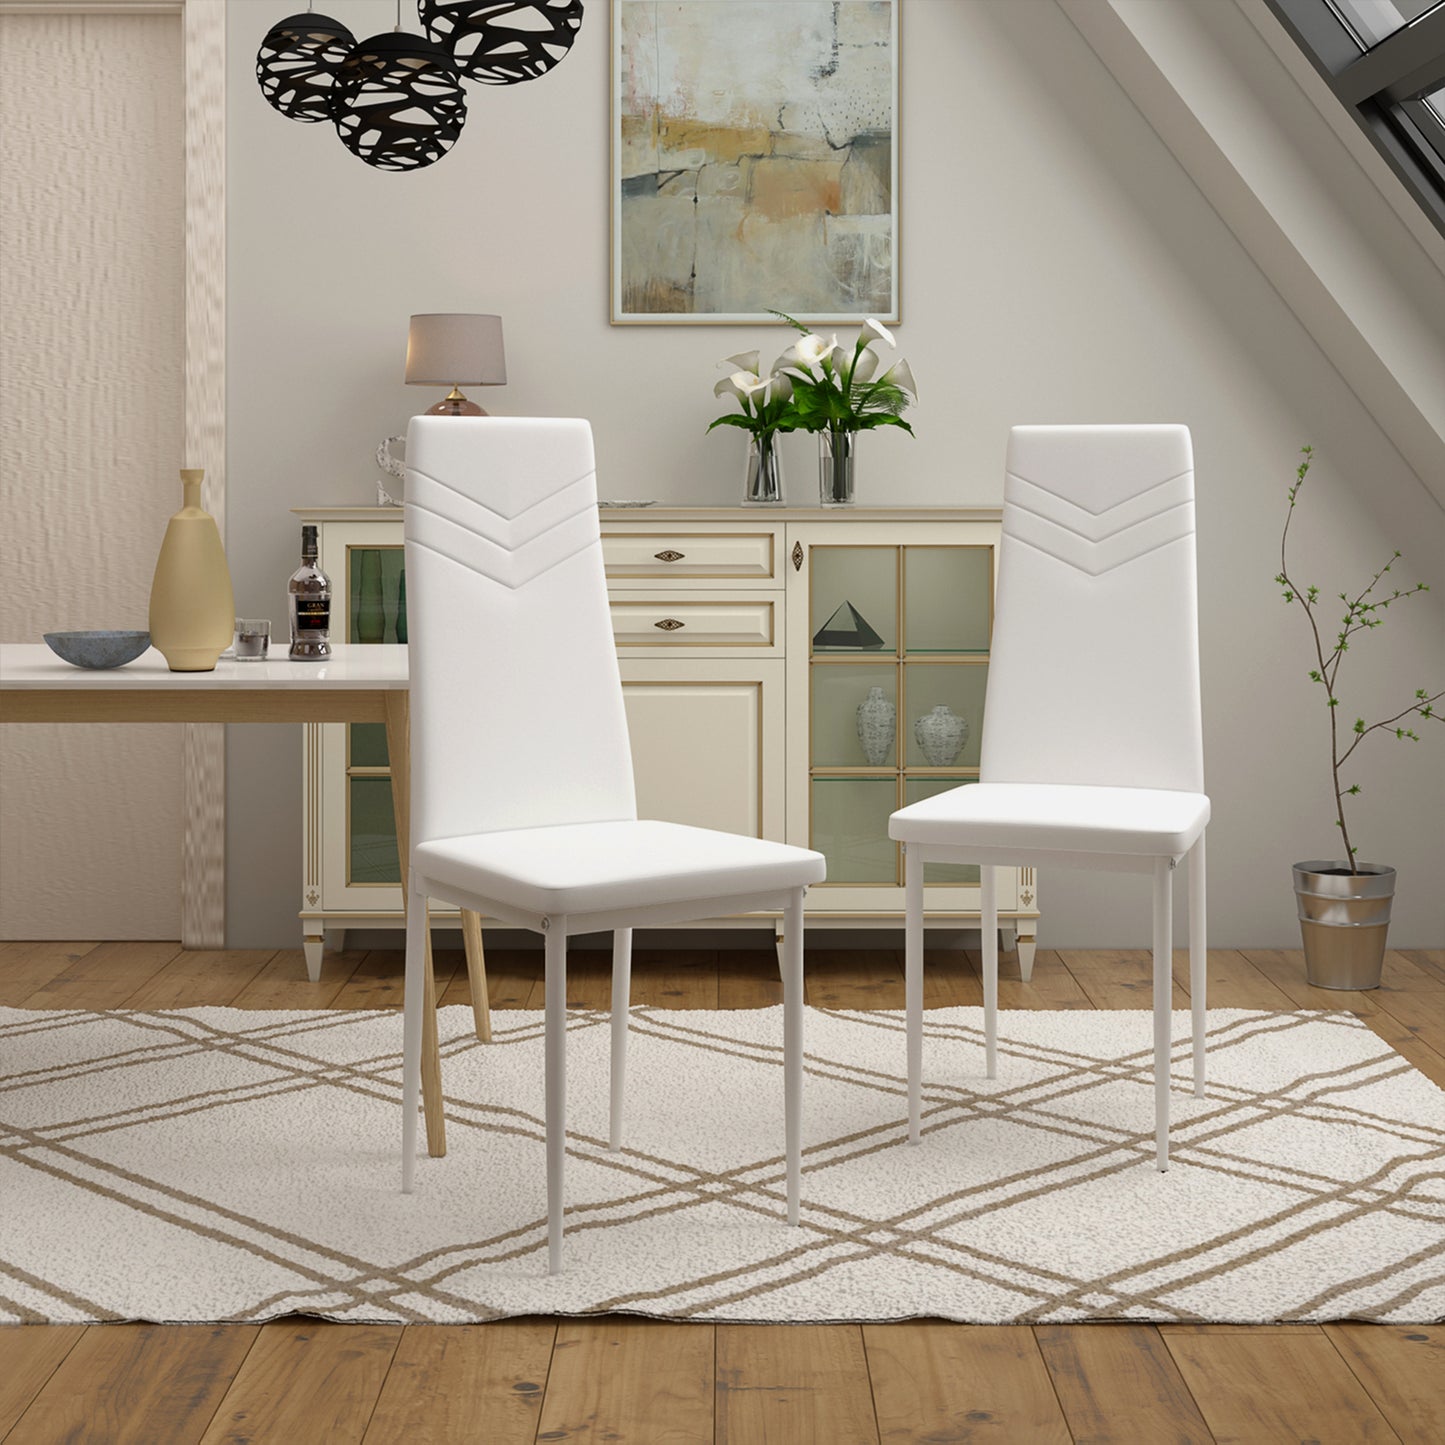 ANN-V Upholstered Dining Chair with Iron Legs - White